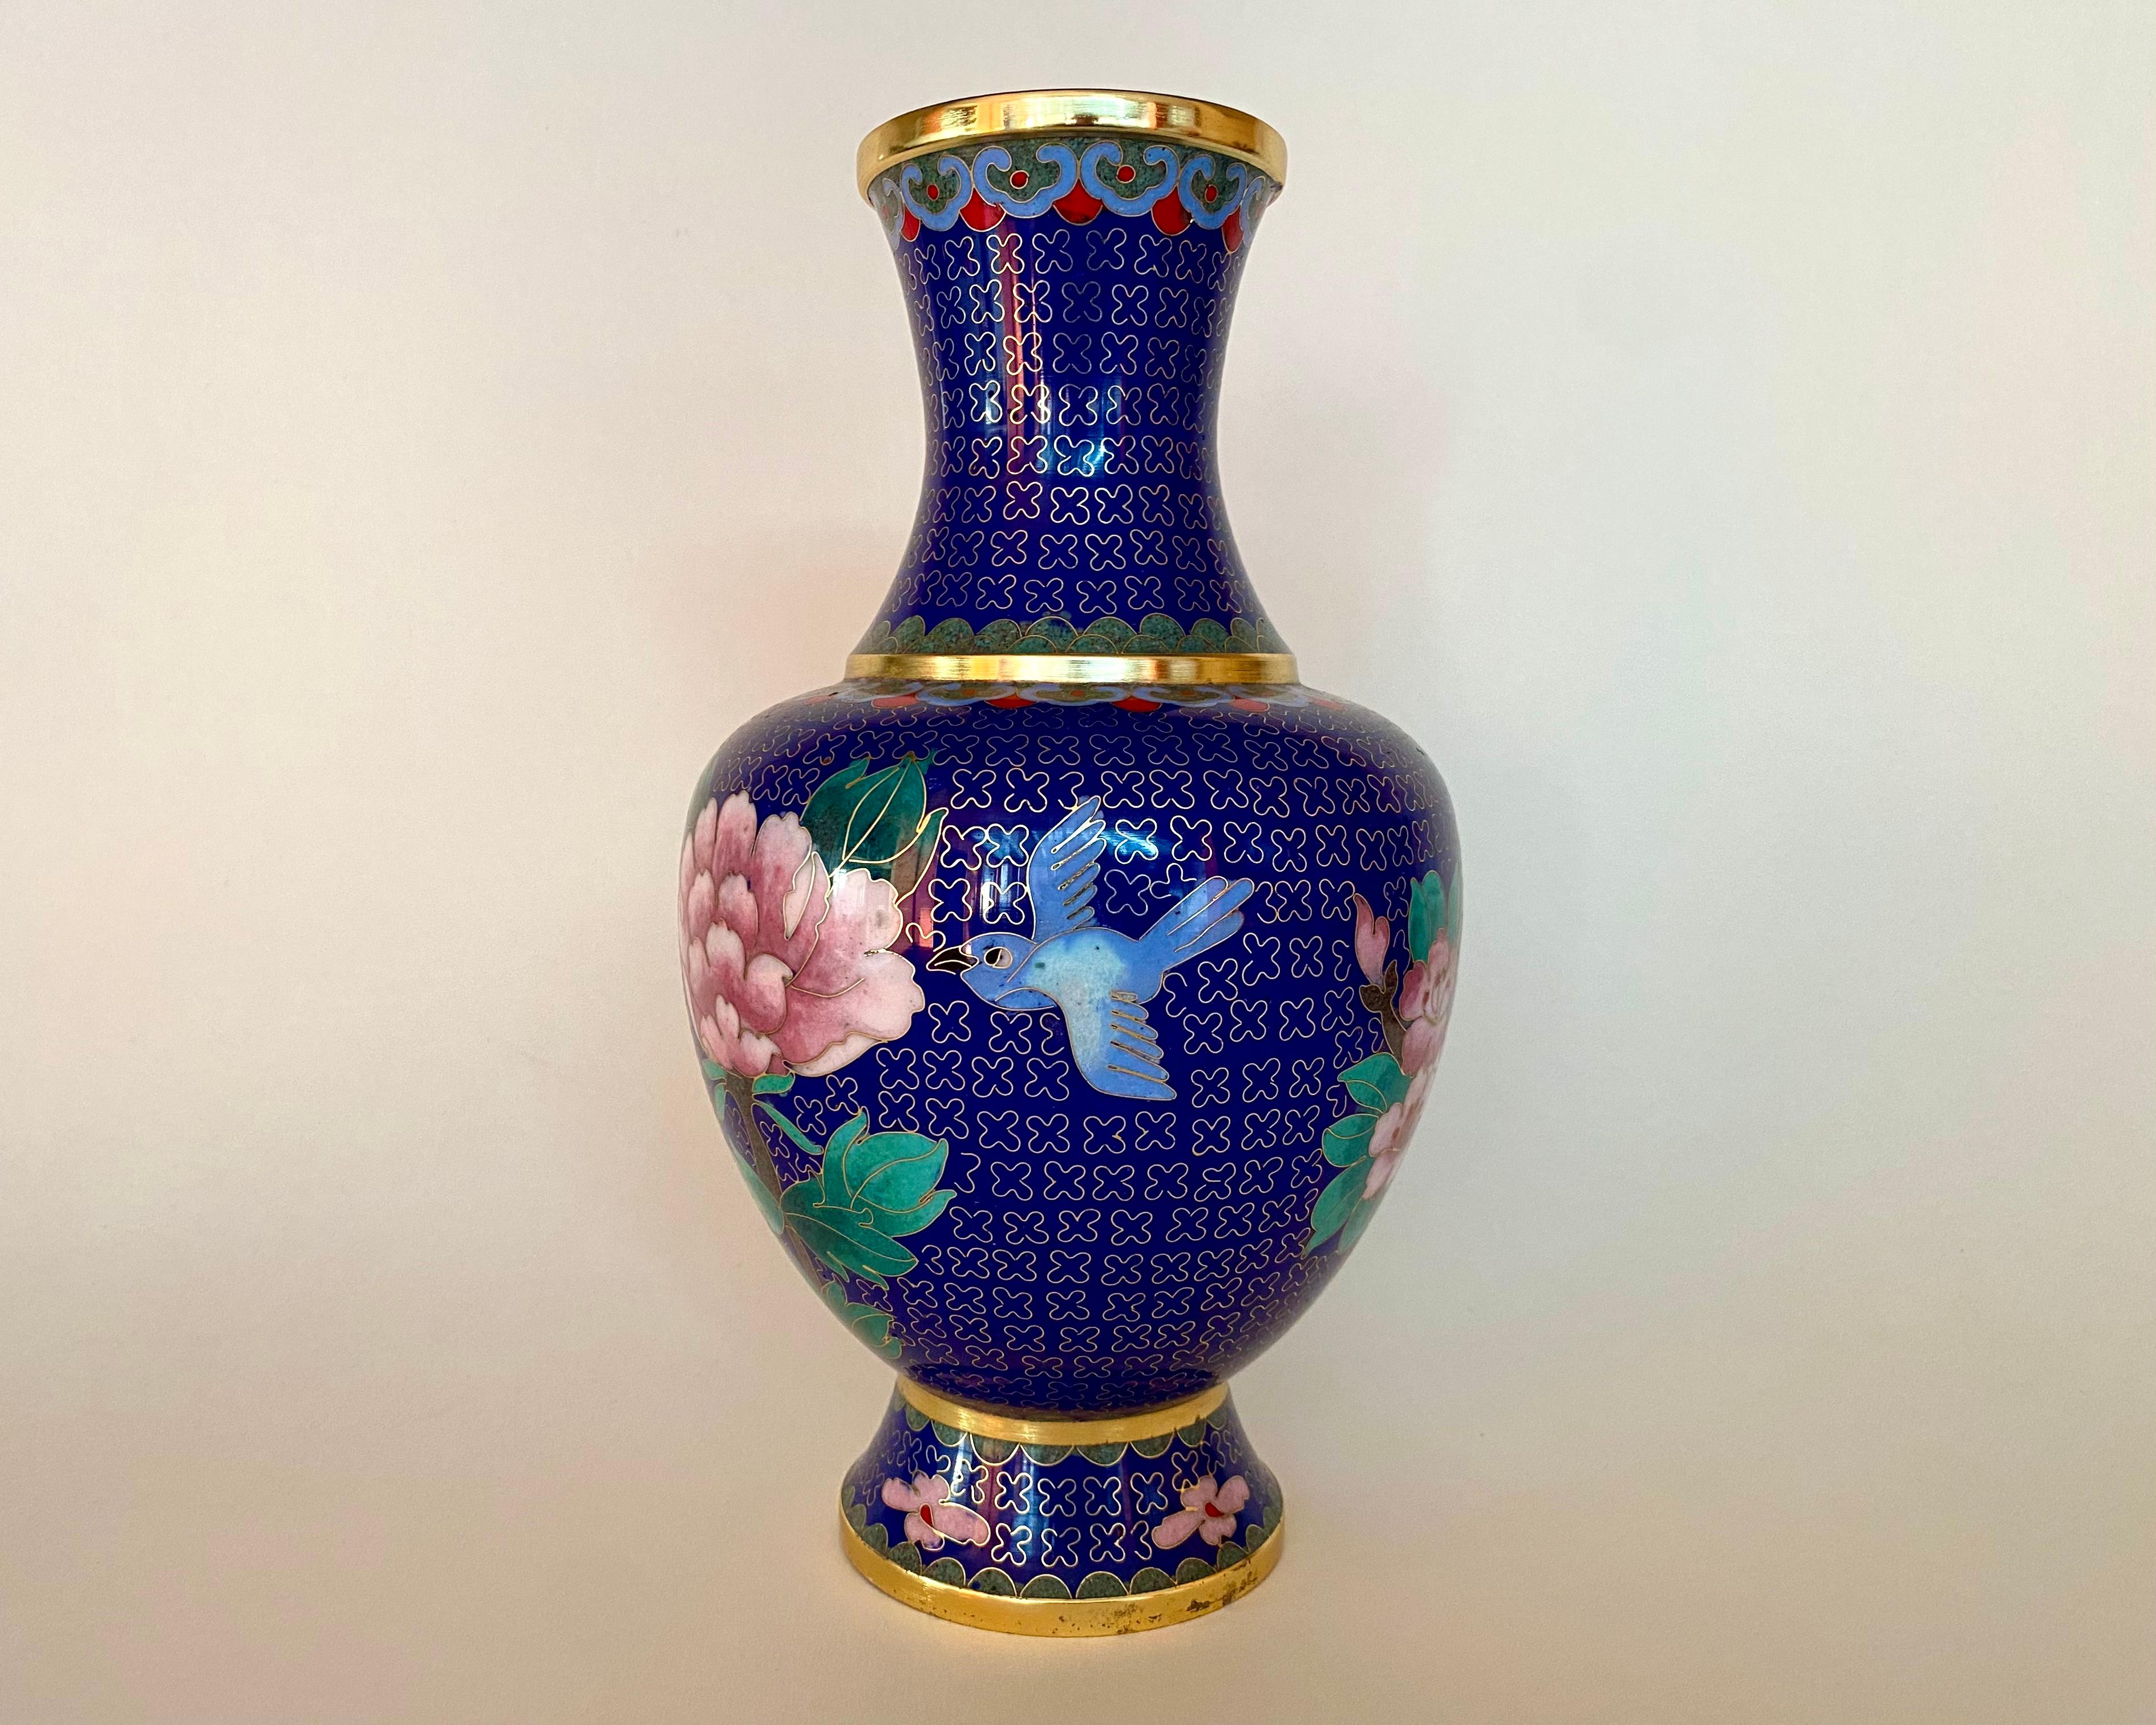 Late 20th Century Vintage Enamel and Brass Vase in Cloisonné Technique, China, 1980 For Sale